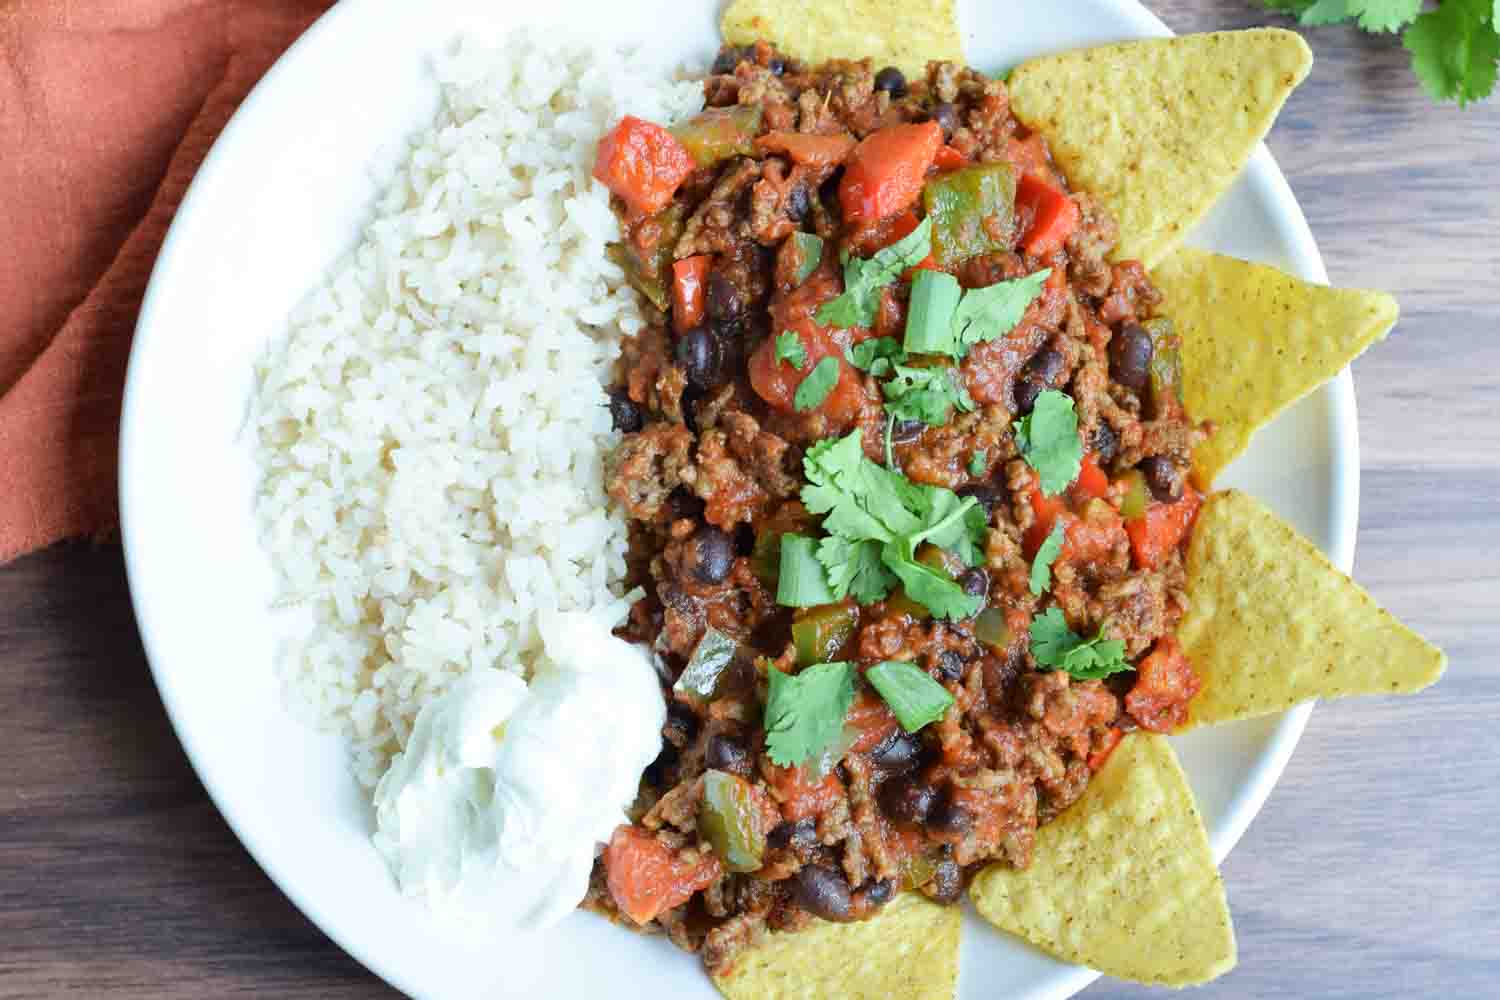 A plate of low FODMAP chili con carne